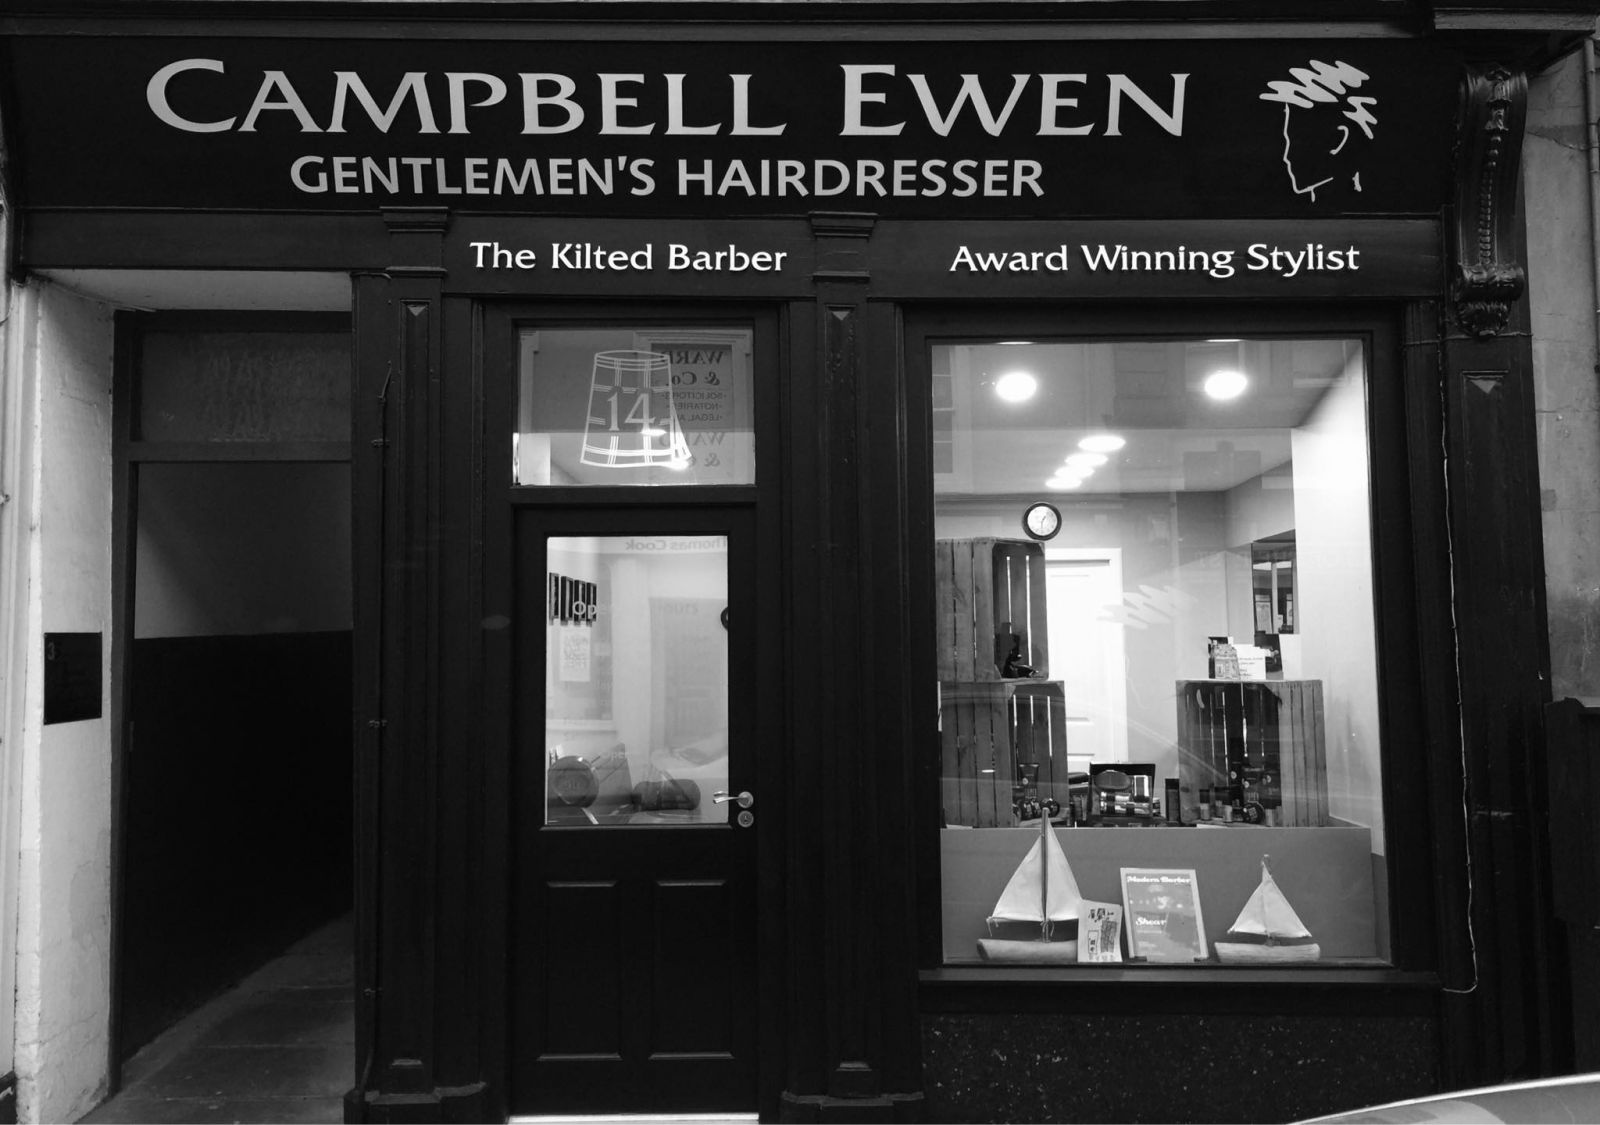 Campbell Ewen the Kilted Barber on Perth's George Street